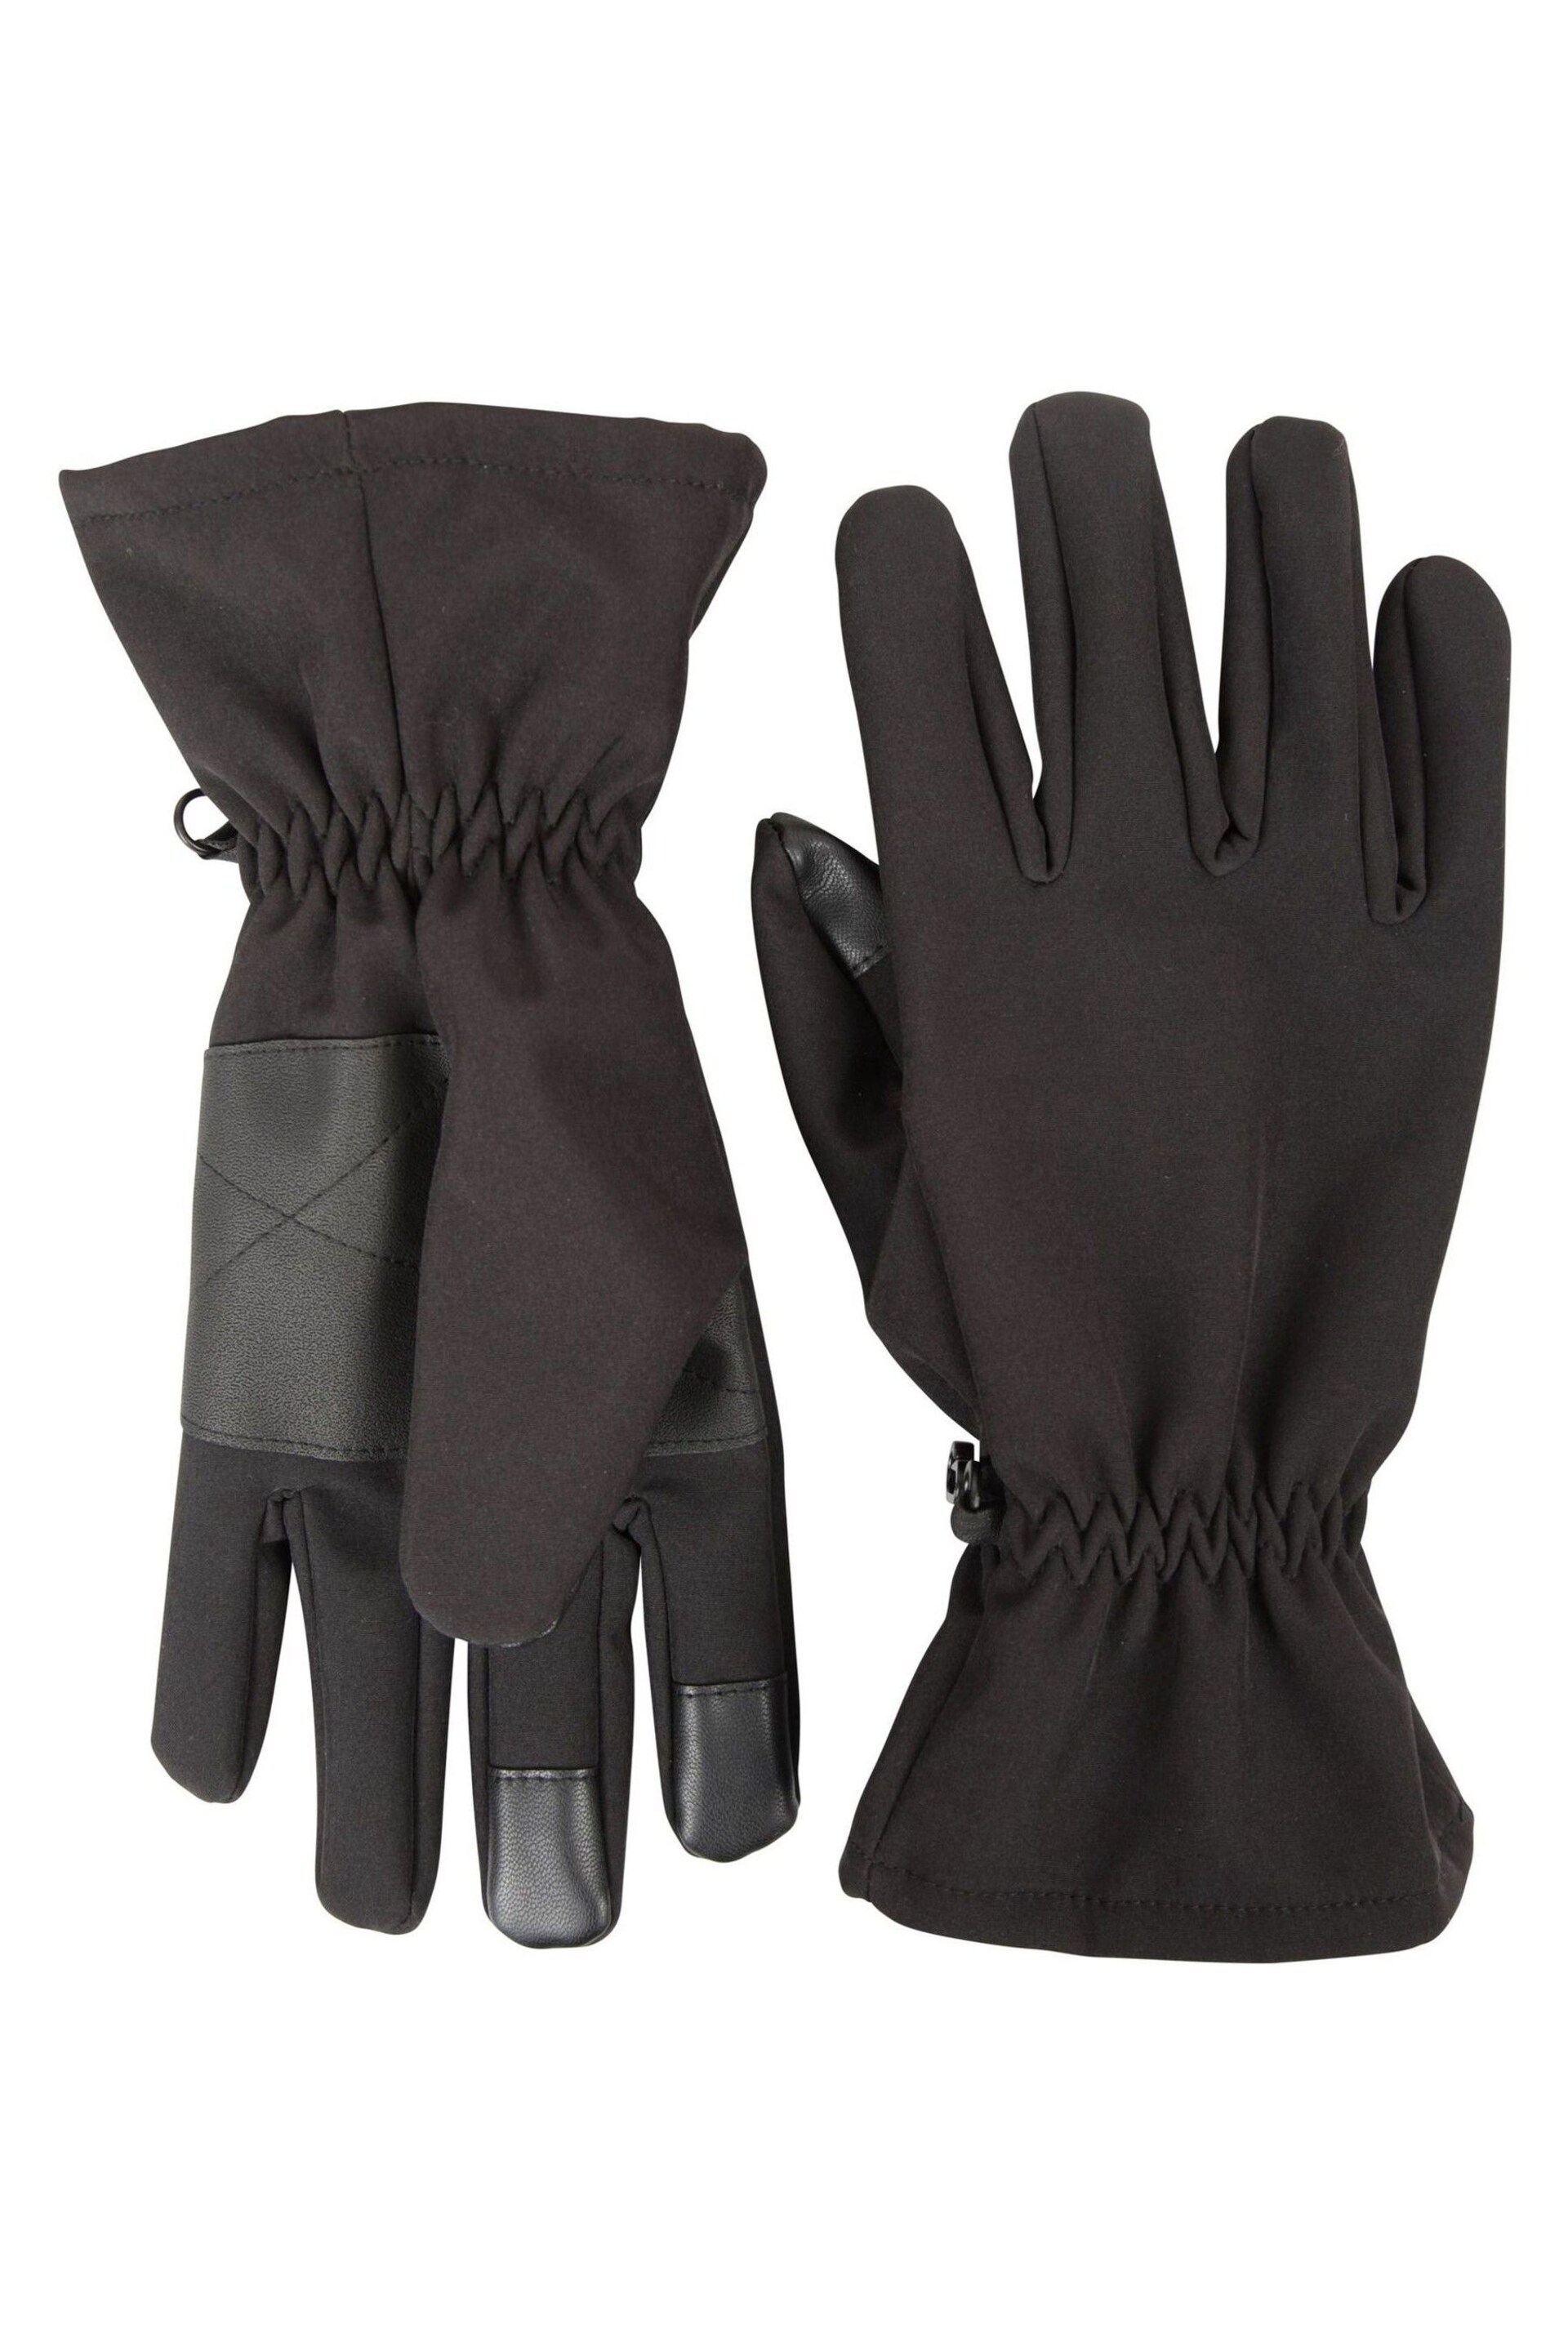 Mountain Warehouse Black Water Repellent Wind Resistant Mens Gloves - Image 1 of 5